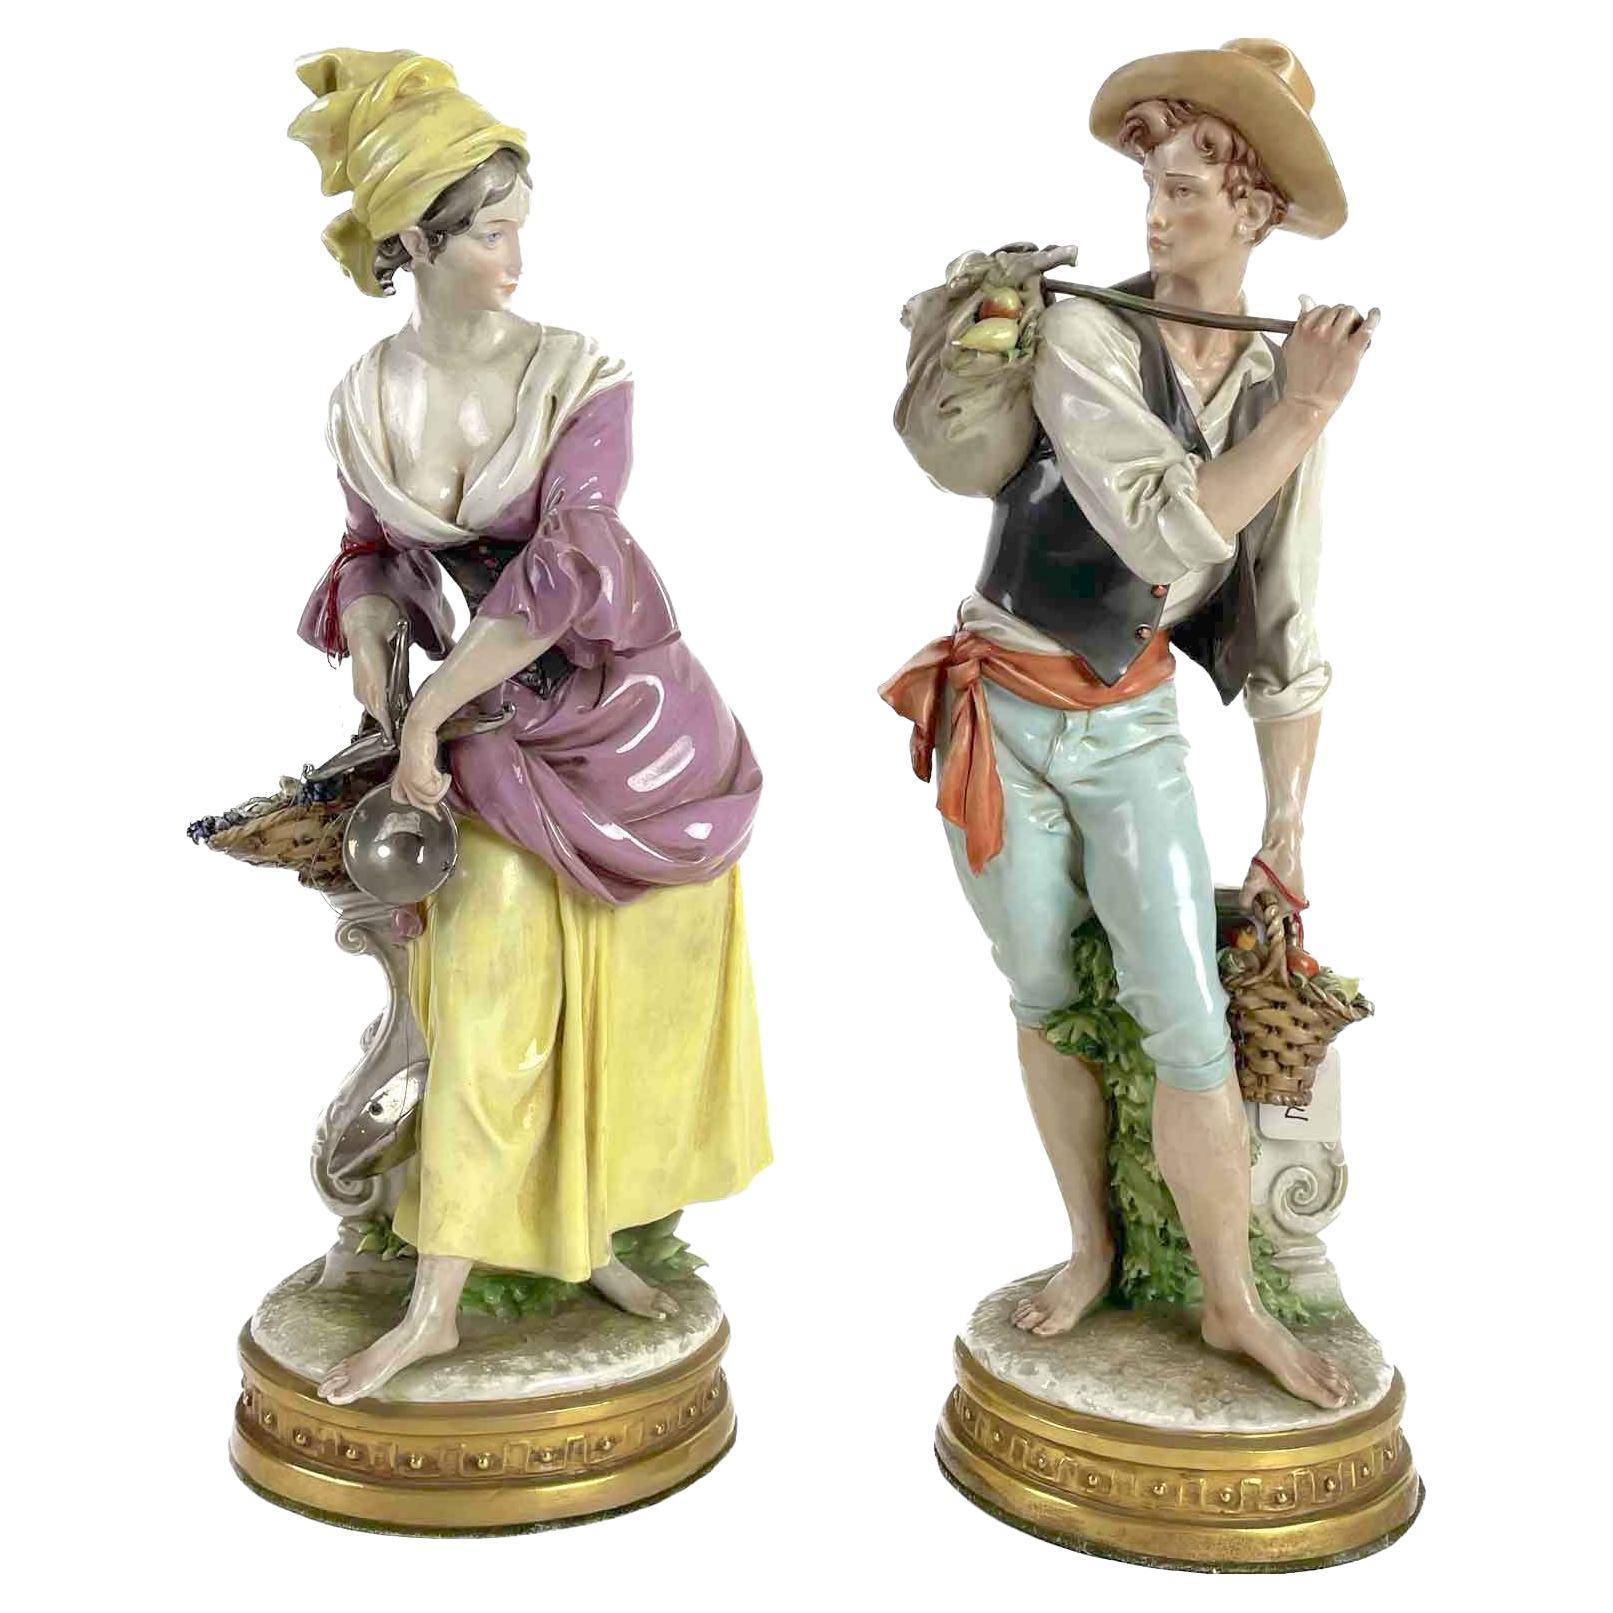 Pair of Italian Peasant Figures Allegory of Abundance by Cappe Giuseppe, 1960s